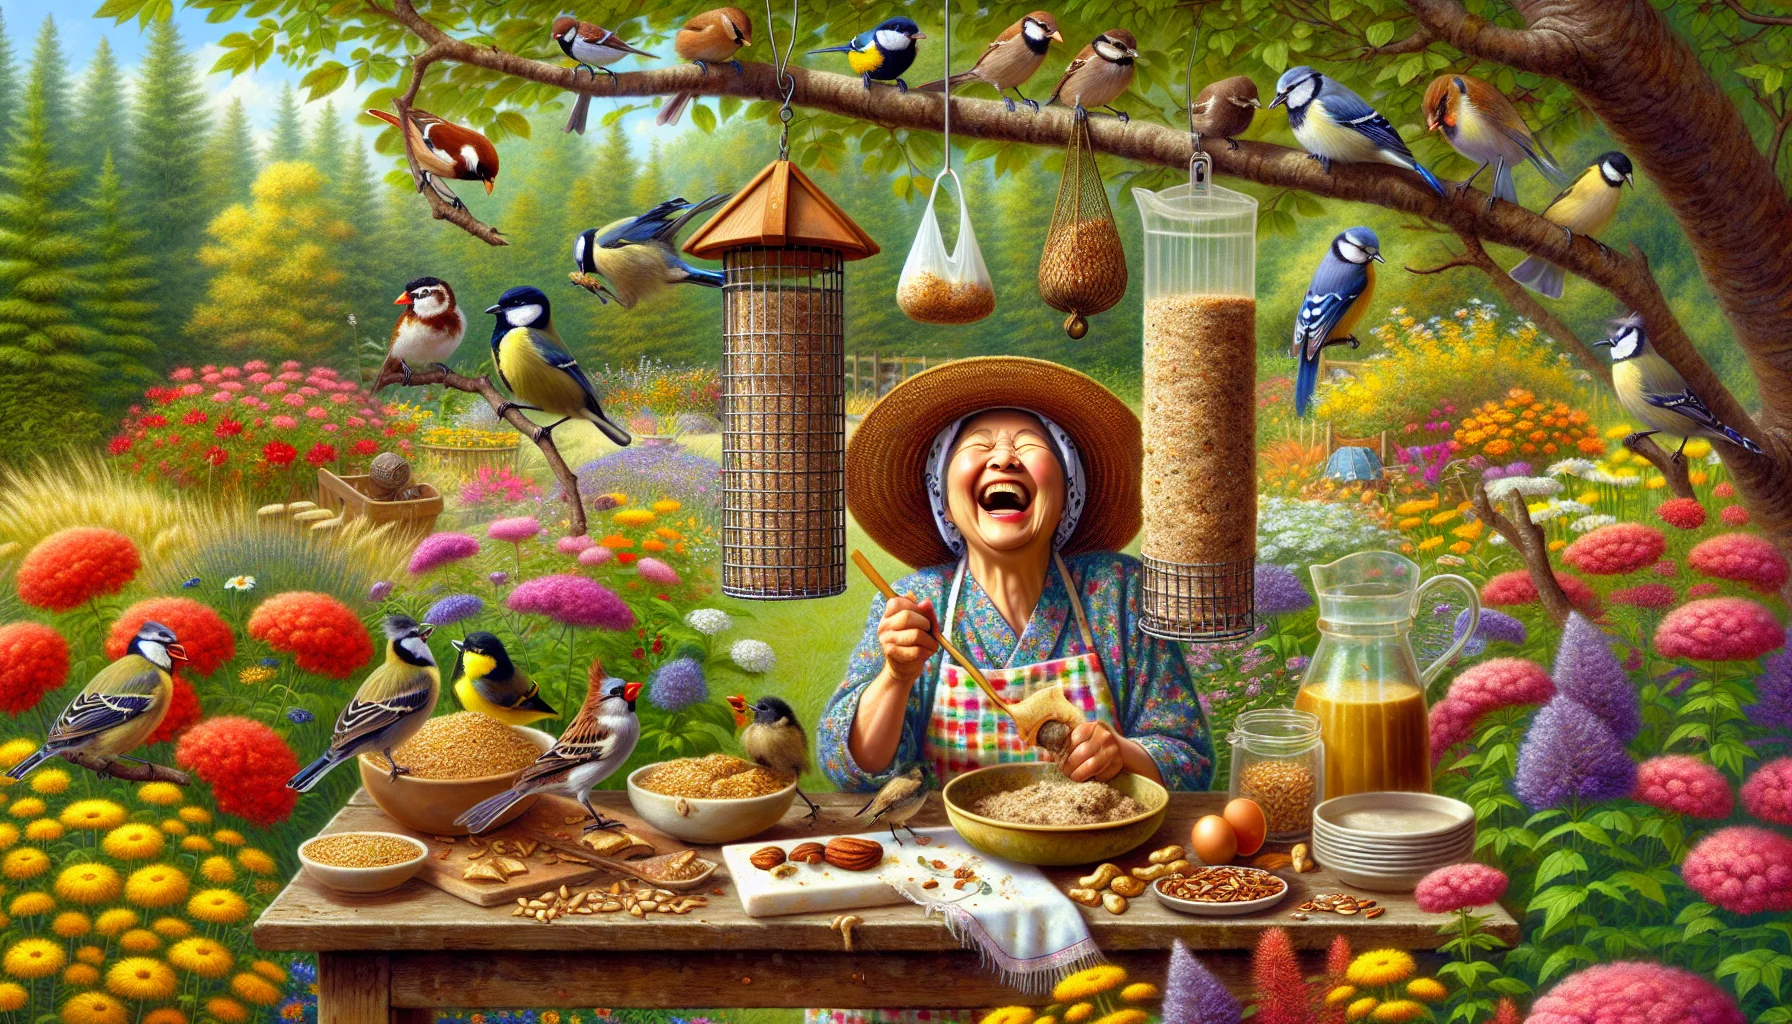 Generate an amusing and realistic scene dedicated to Easy Bird Suet Recipes. The scene includes an outdoor garden setting with a multitude of colorful flowers and plants. The focal point is a suet feeder hanging from a tree branch teeming with chirping birds of various species such as sparrows, finches, and bluejays. Near the feeder, a whimsical sight of a South Asian woman wearing a gardener's hat and apron, laughing as she prepares more suet mix with ingredients like seeds, nuts, and lard spread out on a wooden table next to her. This joyful image invites people to experience the pleasure of gardening and bird-feeding.